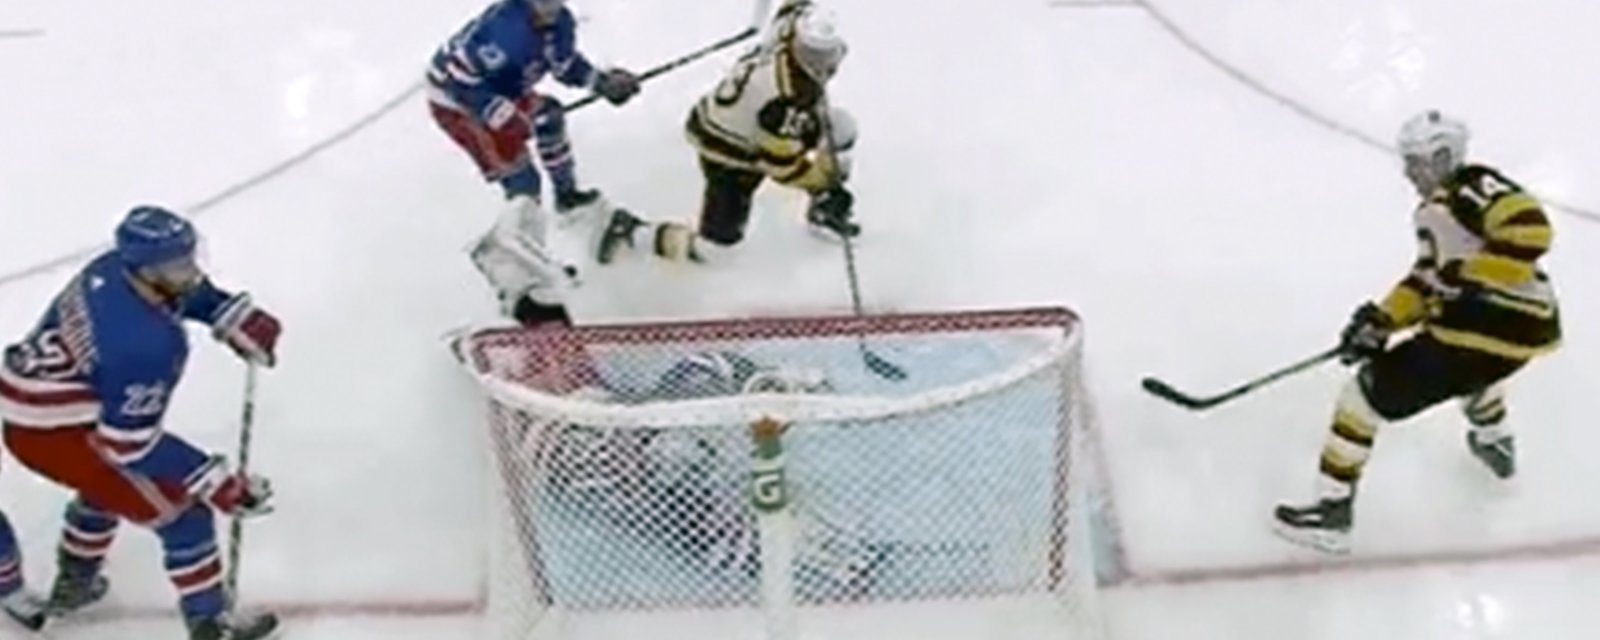 Lundqvist absolutely robs Bruins’ Wagner with a diving paddle save